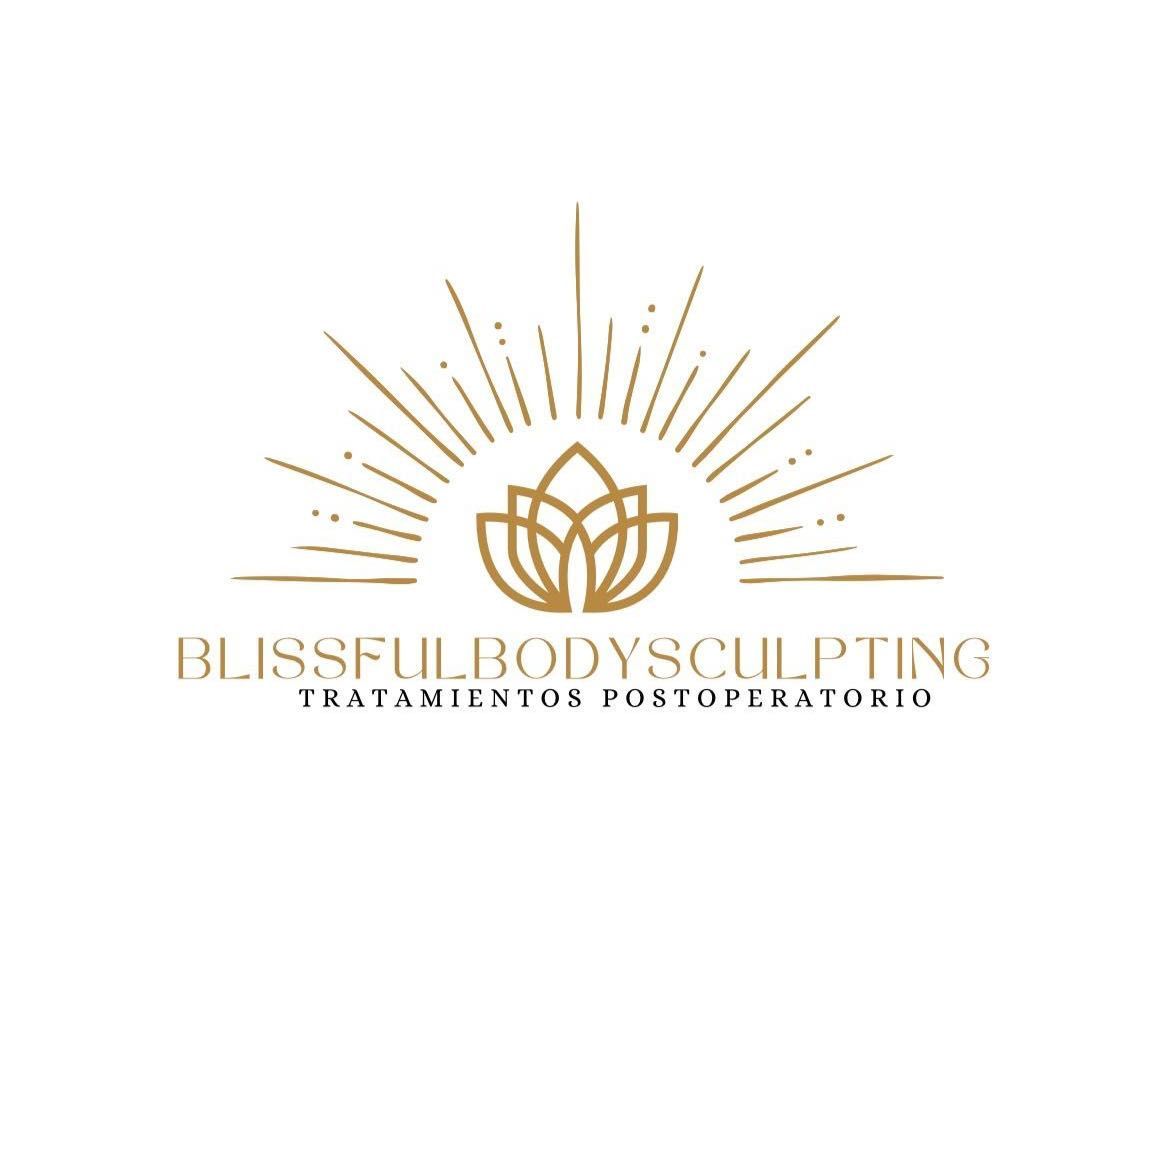 Blissfulbodysculpting, 3050 Station Square, Besame FL 34746, Kissimmee, 34744